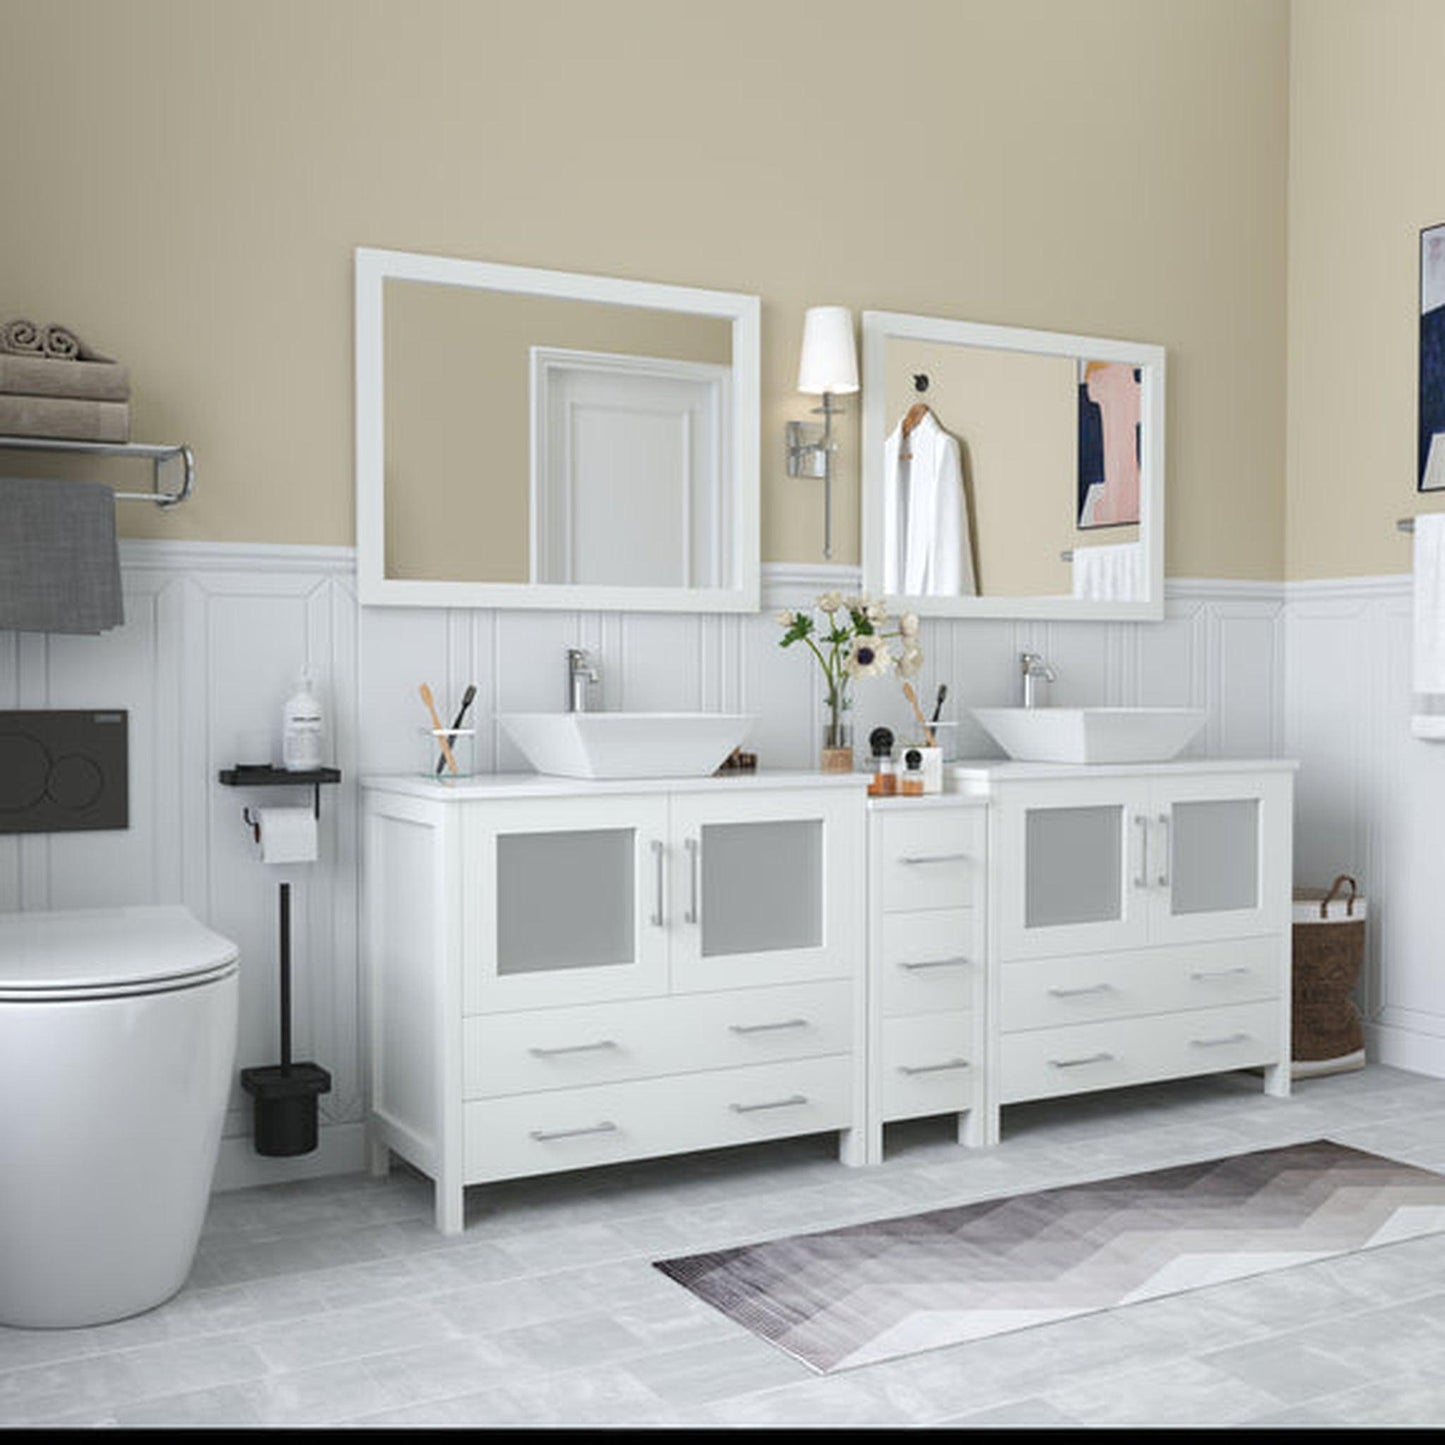 Vanity Art Ravenna 84" Double White Freestanding Vanity Set With White Engineered Marble Top, 2 Ceramic Vessel Sinks, 1 Side Cabinet and 2 Mirrors